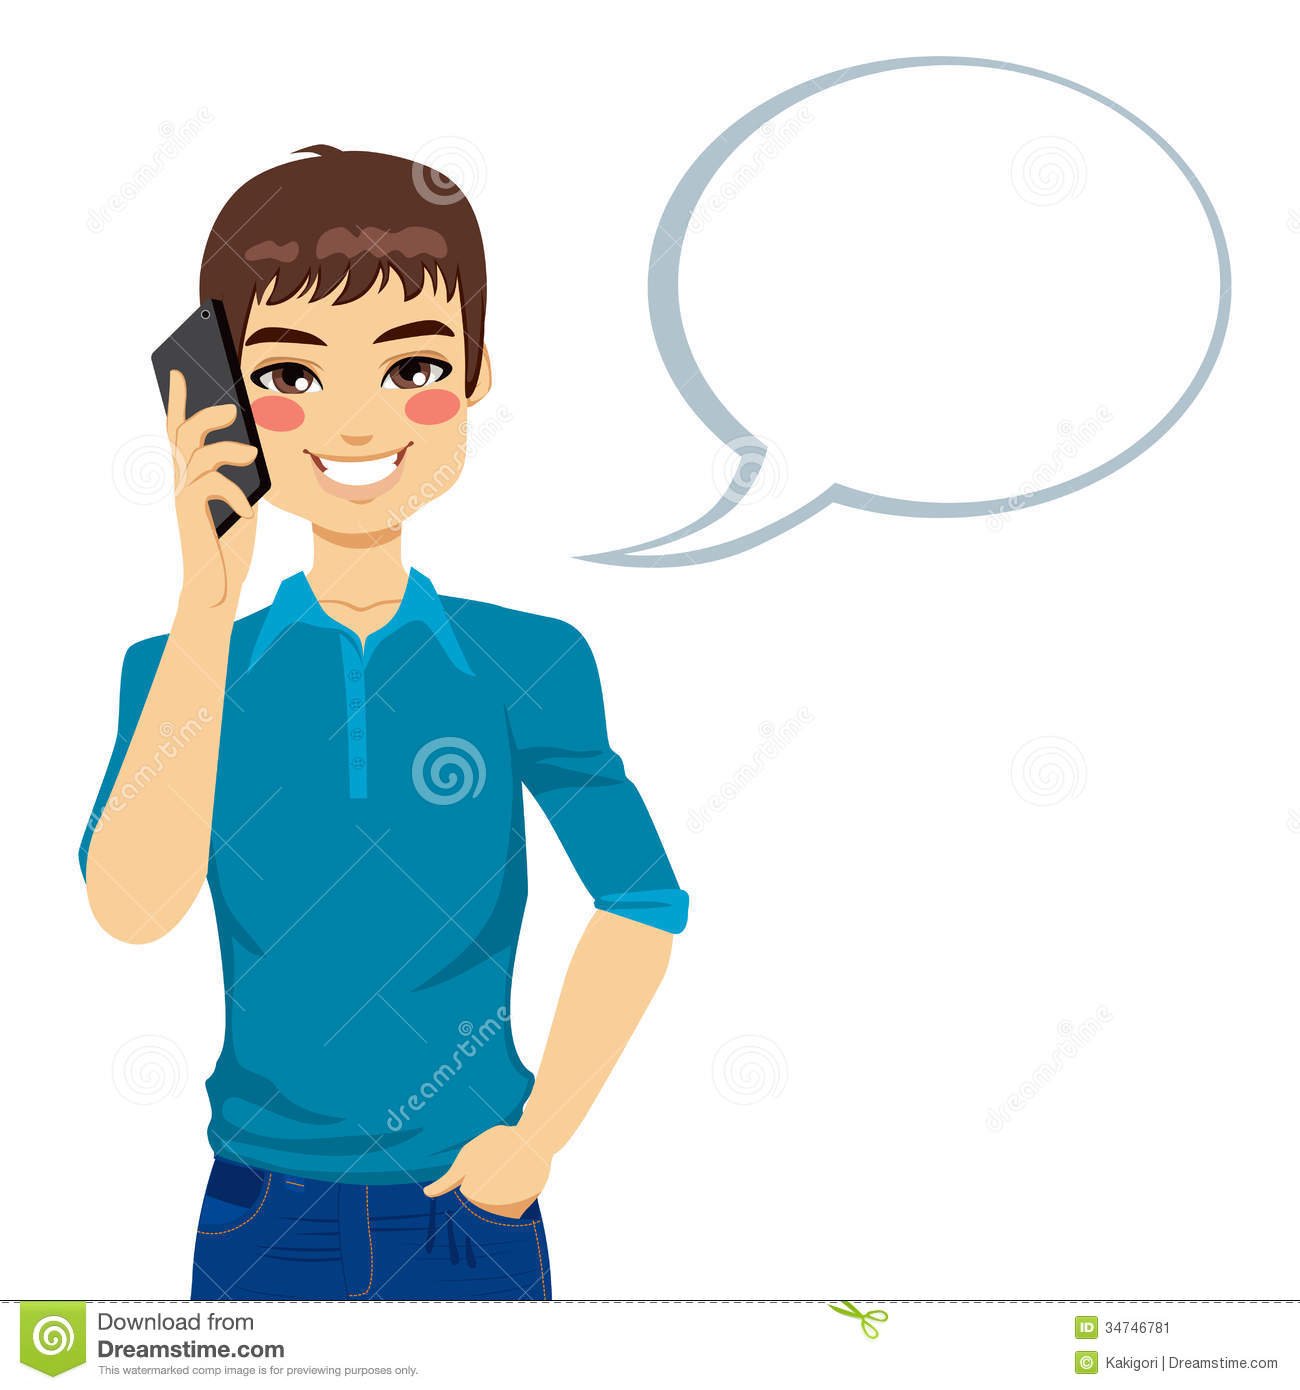 Young Man Speaking Using His Mobile Phone With A Speech Bubble 